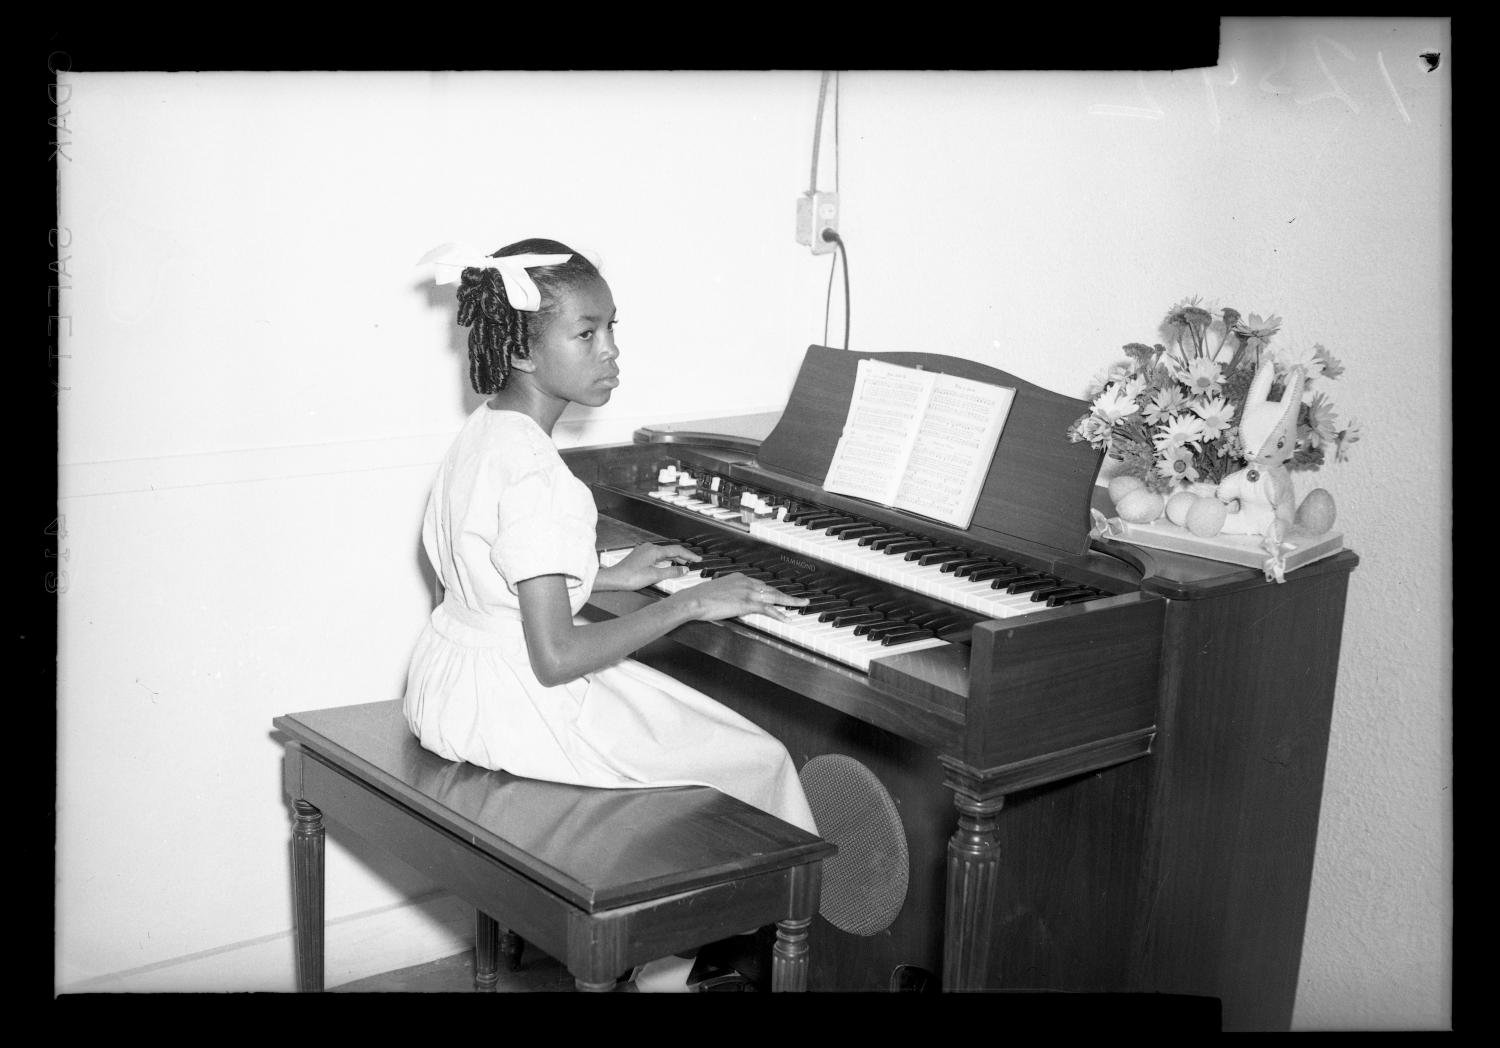 Photograph of a Young Girl Playing a Piano], photograph, Date Unknown